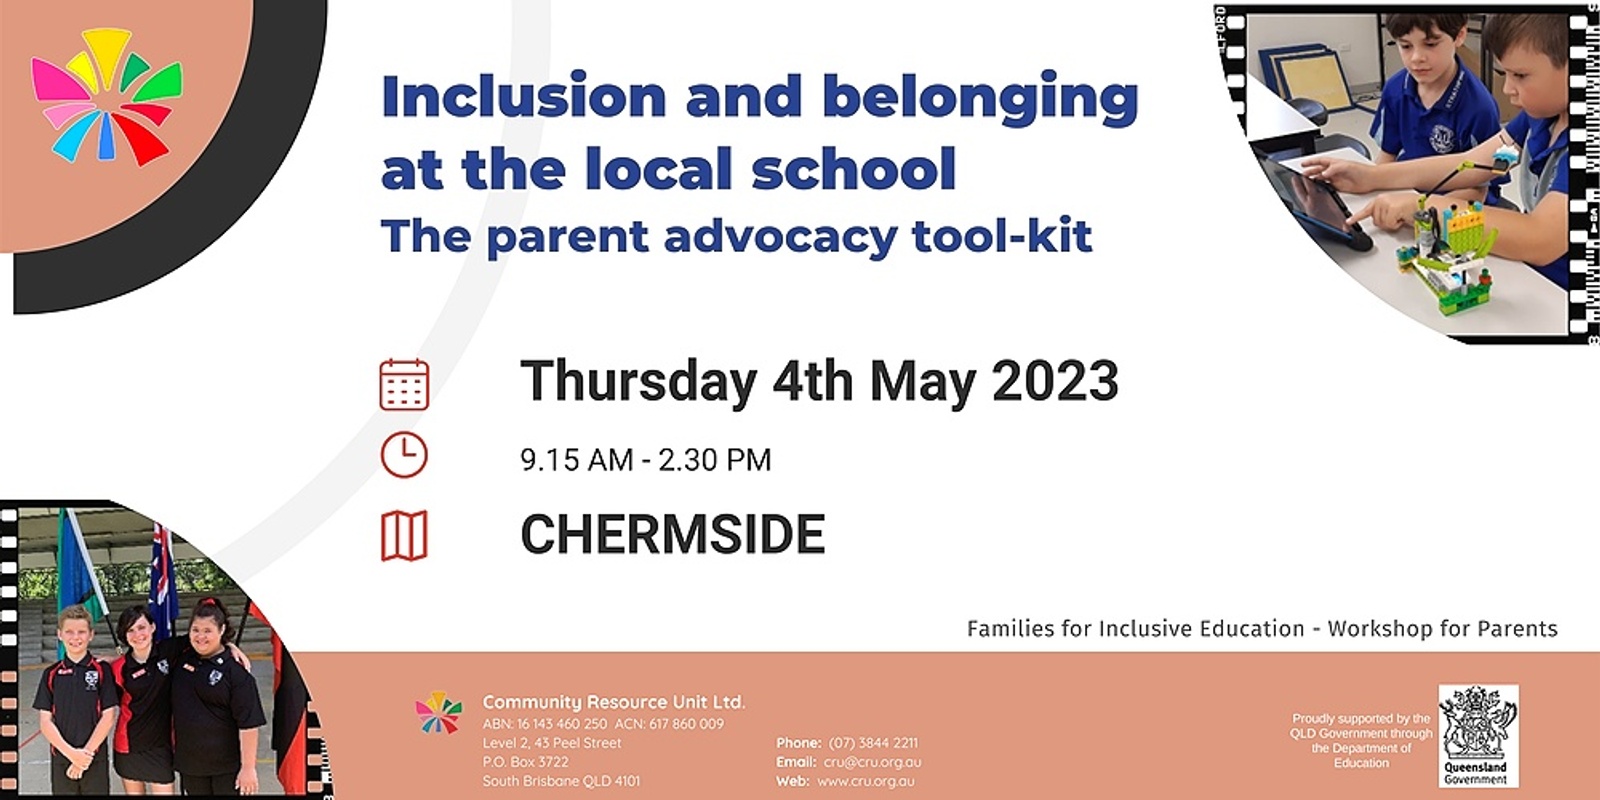 CHERMSIDE:  "Inclusion and belonging at the local school:  The parent advocacy tool-kit" - 4 May